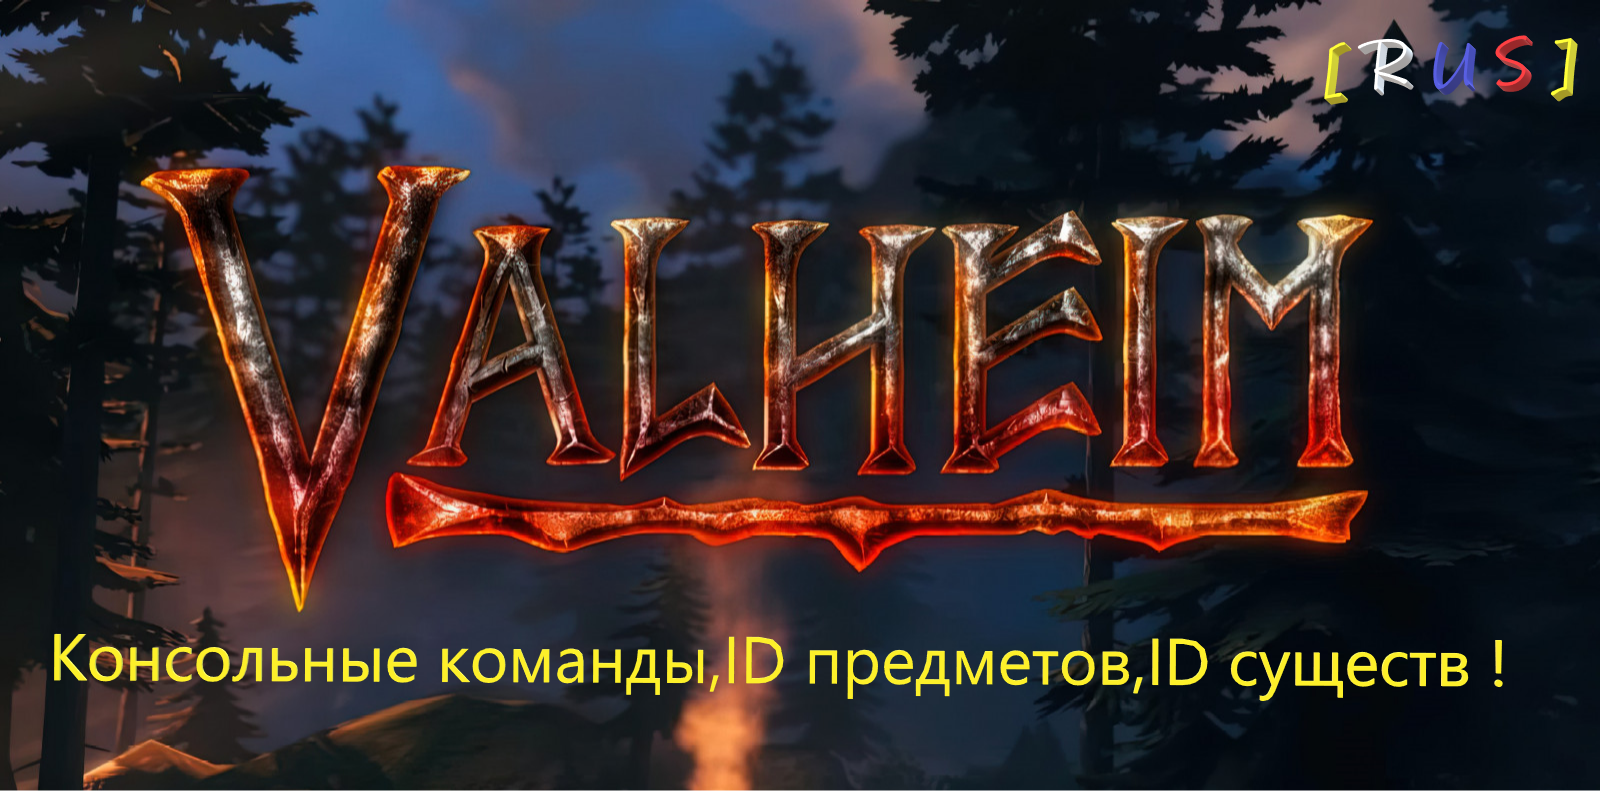 Valheim All console commands and All NPC - Iteams - Skills ID! - Russian version of the guide/Русская версия руководства :